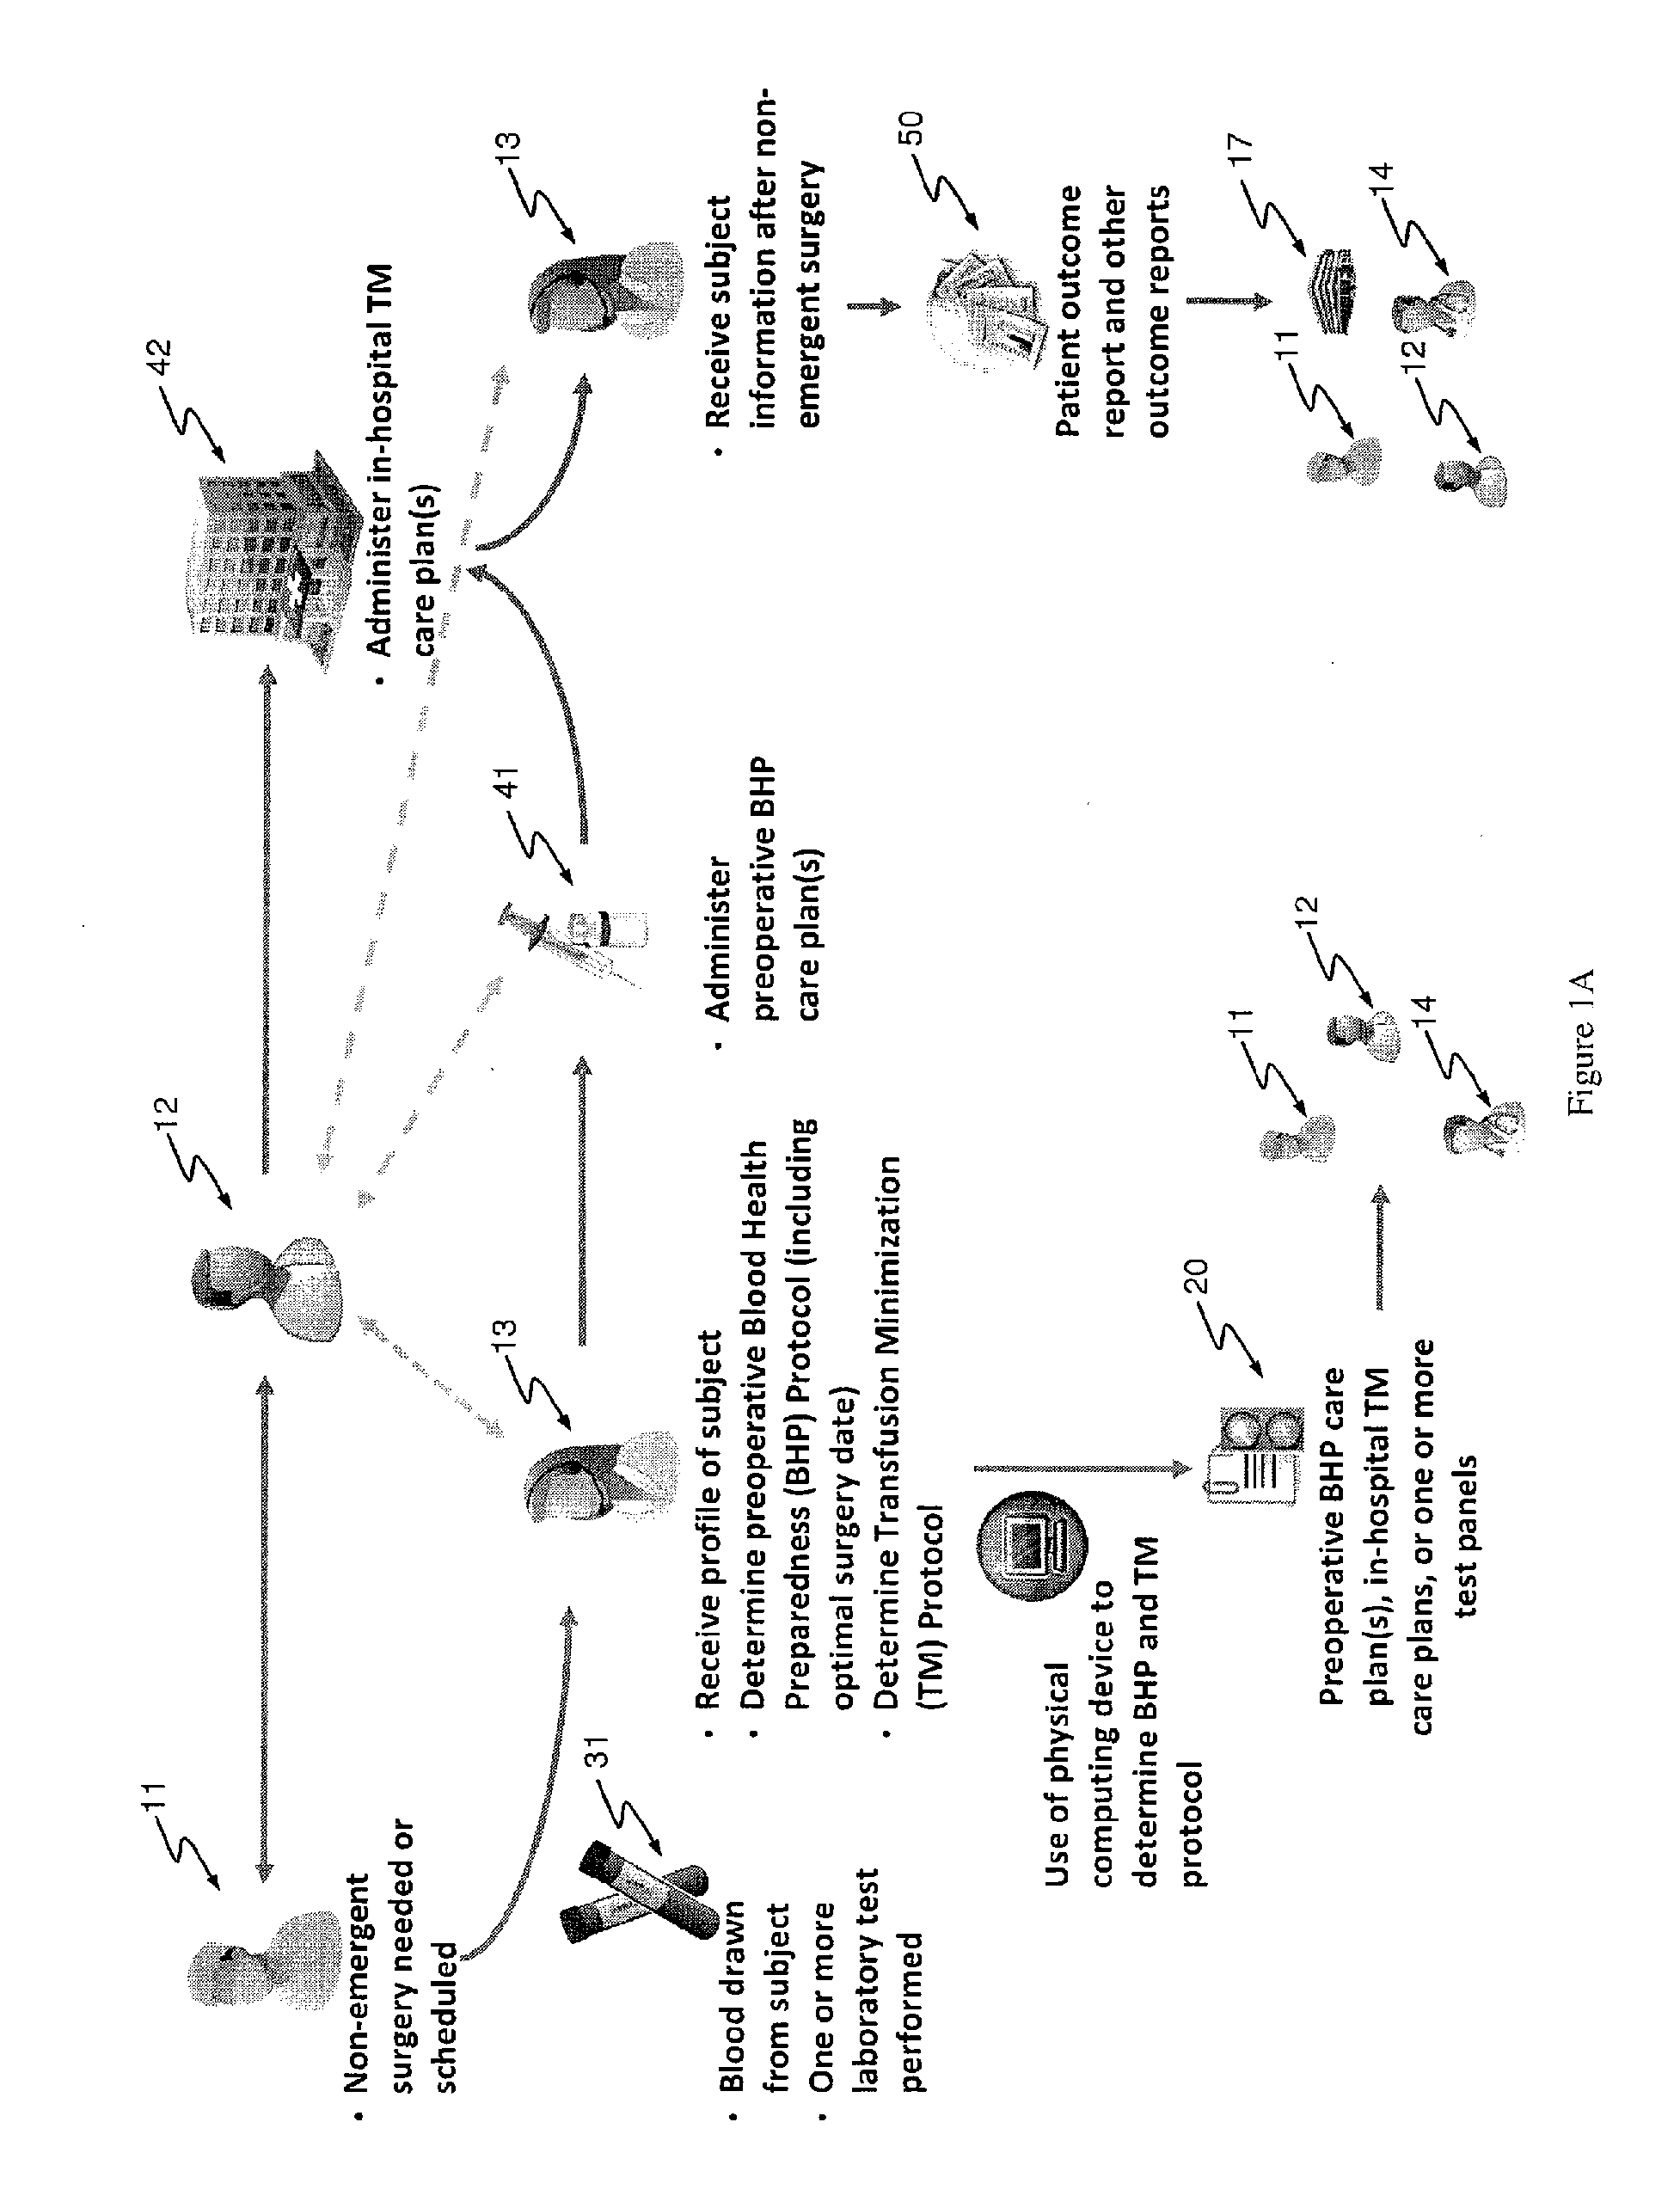 Methods and devices for reducing transfusions during or after surgery and for improving quality of life and function in chronic disease